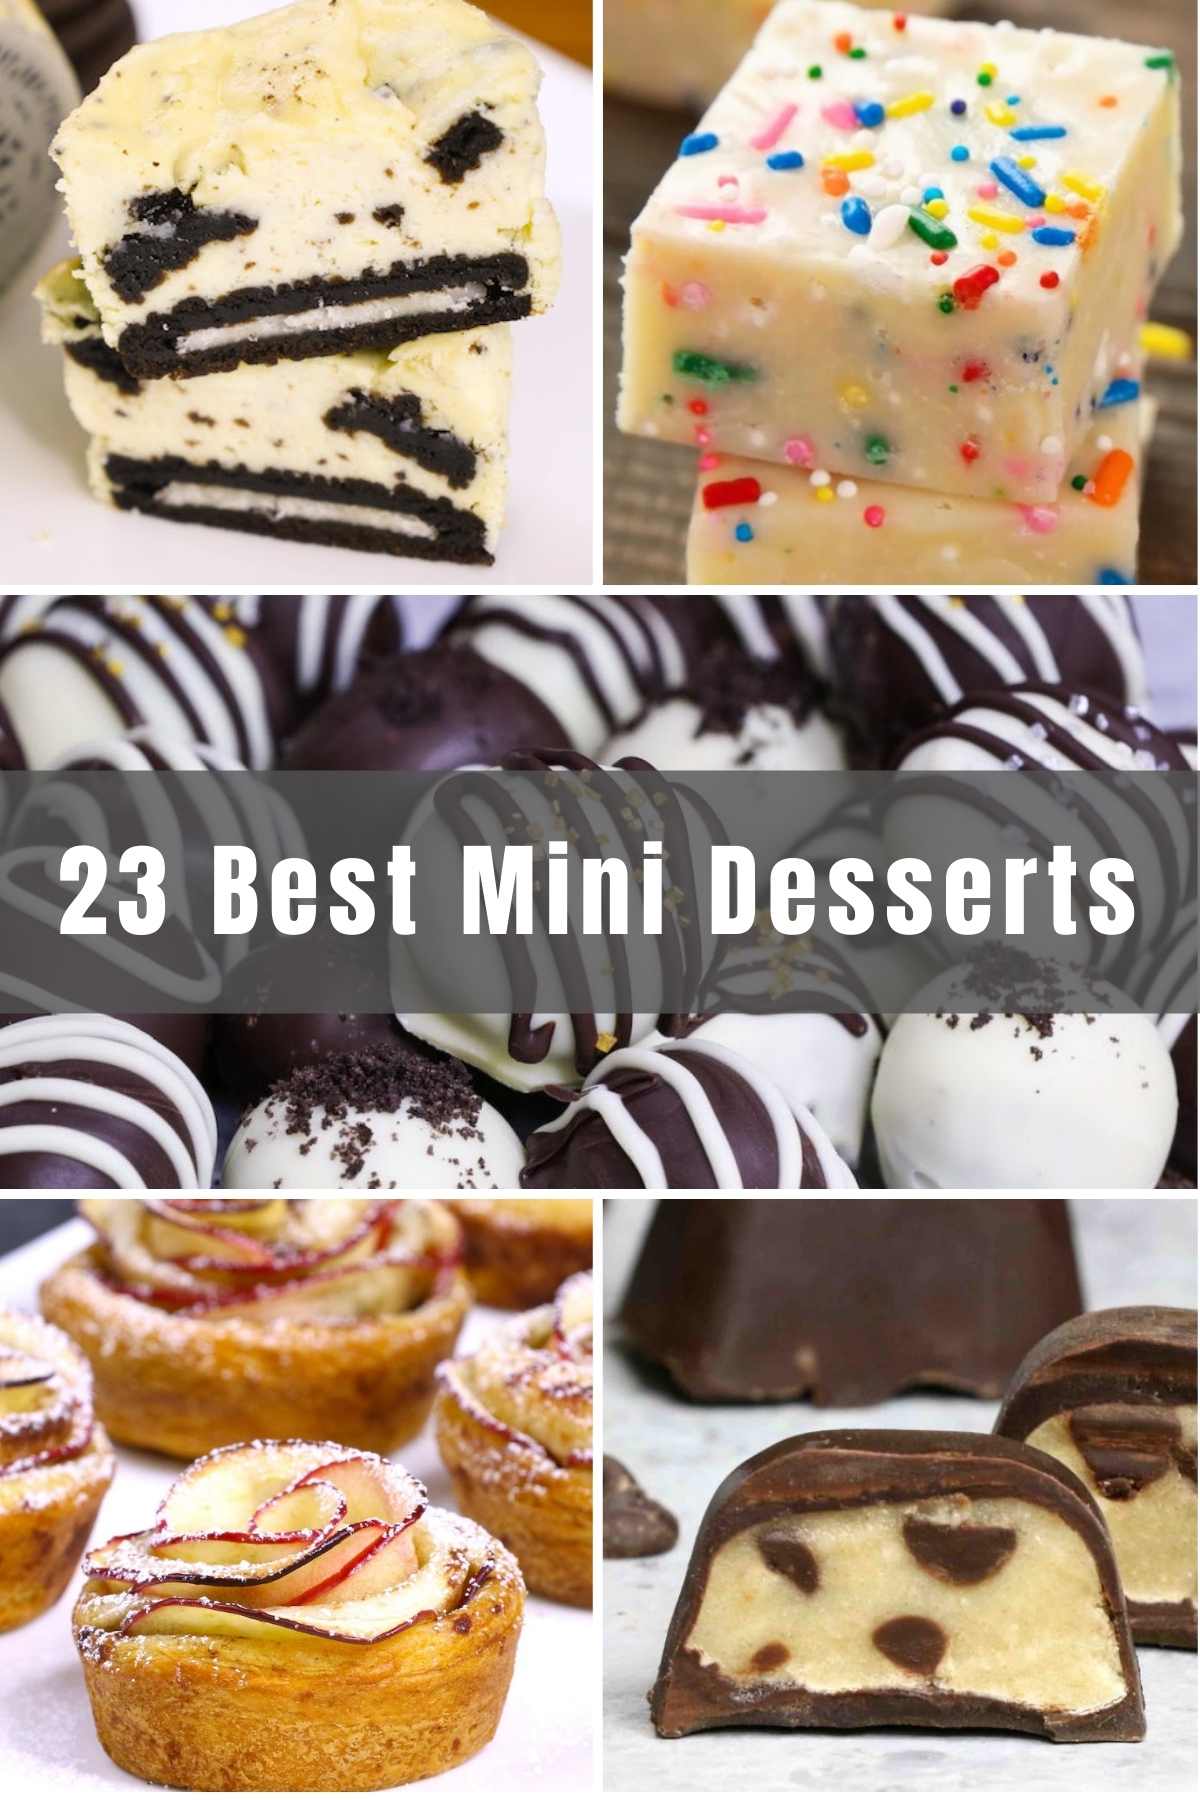 A huge slice of cake is always a sight to behold, but sometimes just a bite or two of a decadent treat is all you need. And for those who love variety, miniature-sized desserts are the best thing ever because you can pick and choose without overindulging.